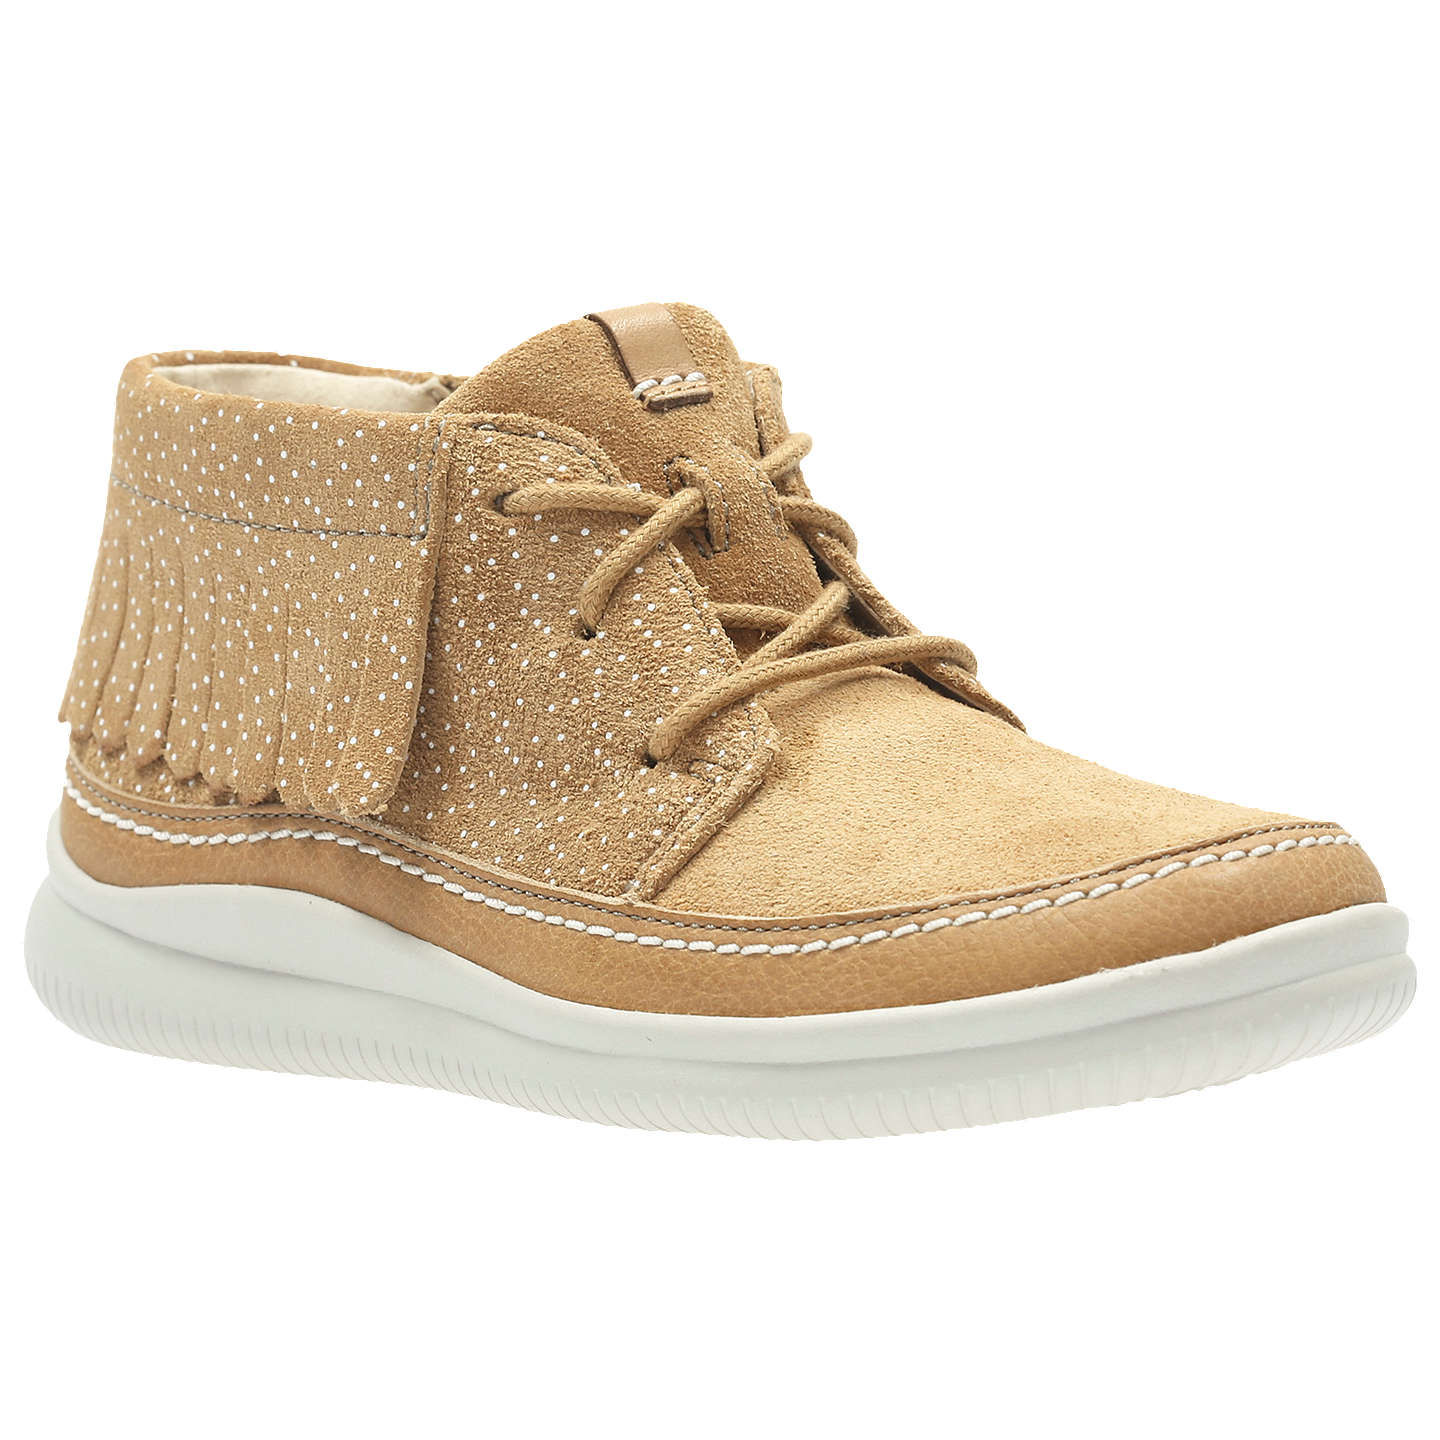 clarks cloud boots off 64% - online-sms.in